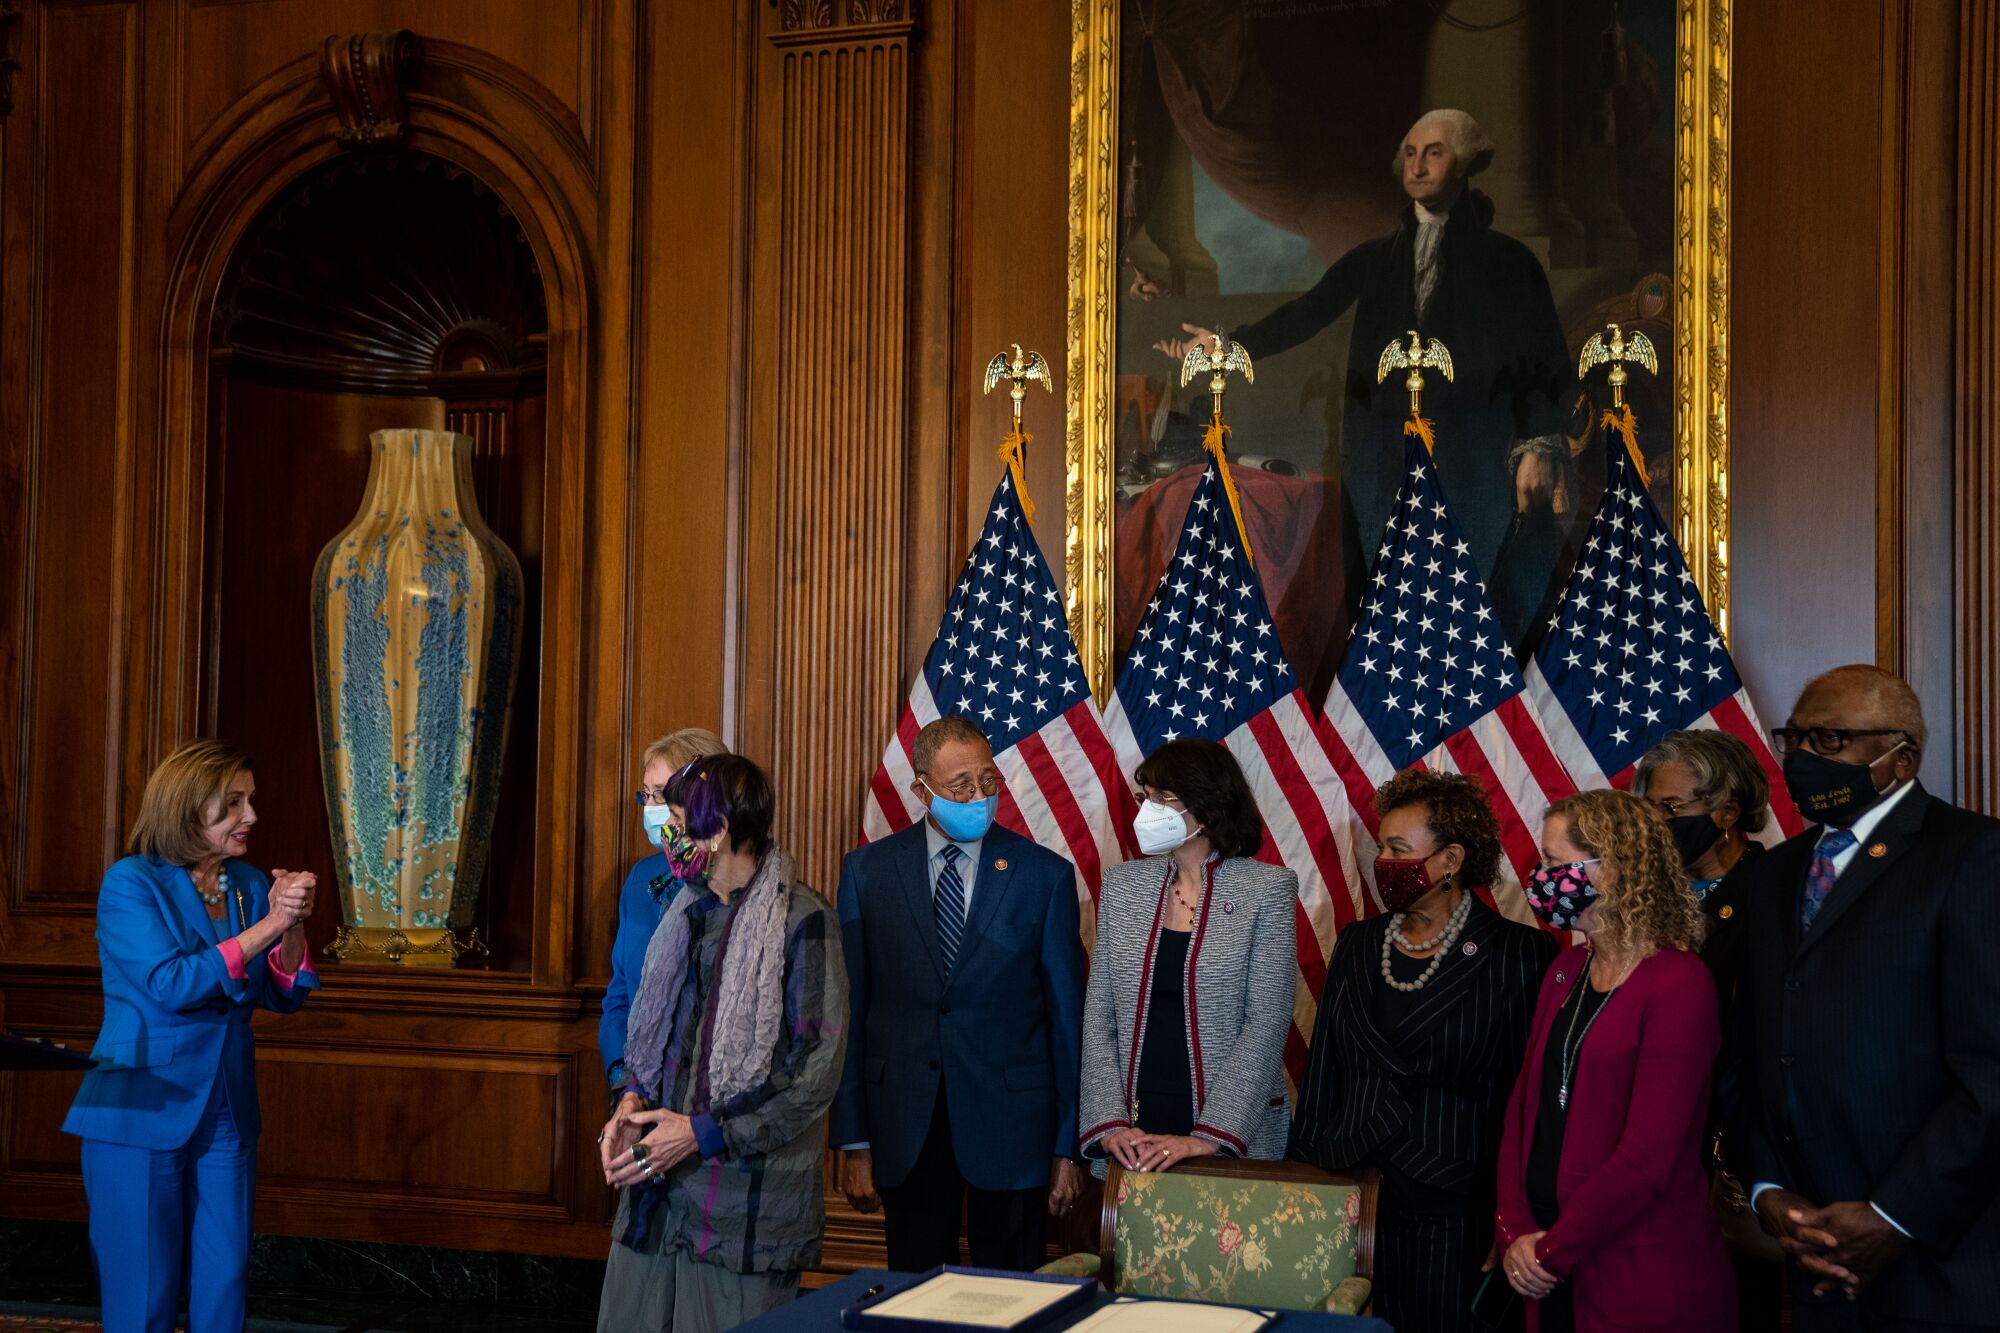 Nancy Pelosi, left, talks with eight others standing before four U.S. flags